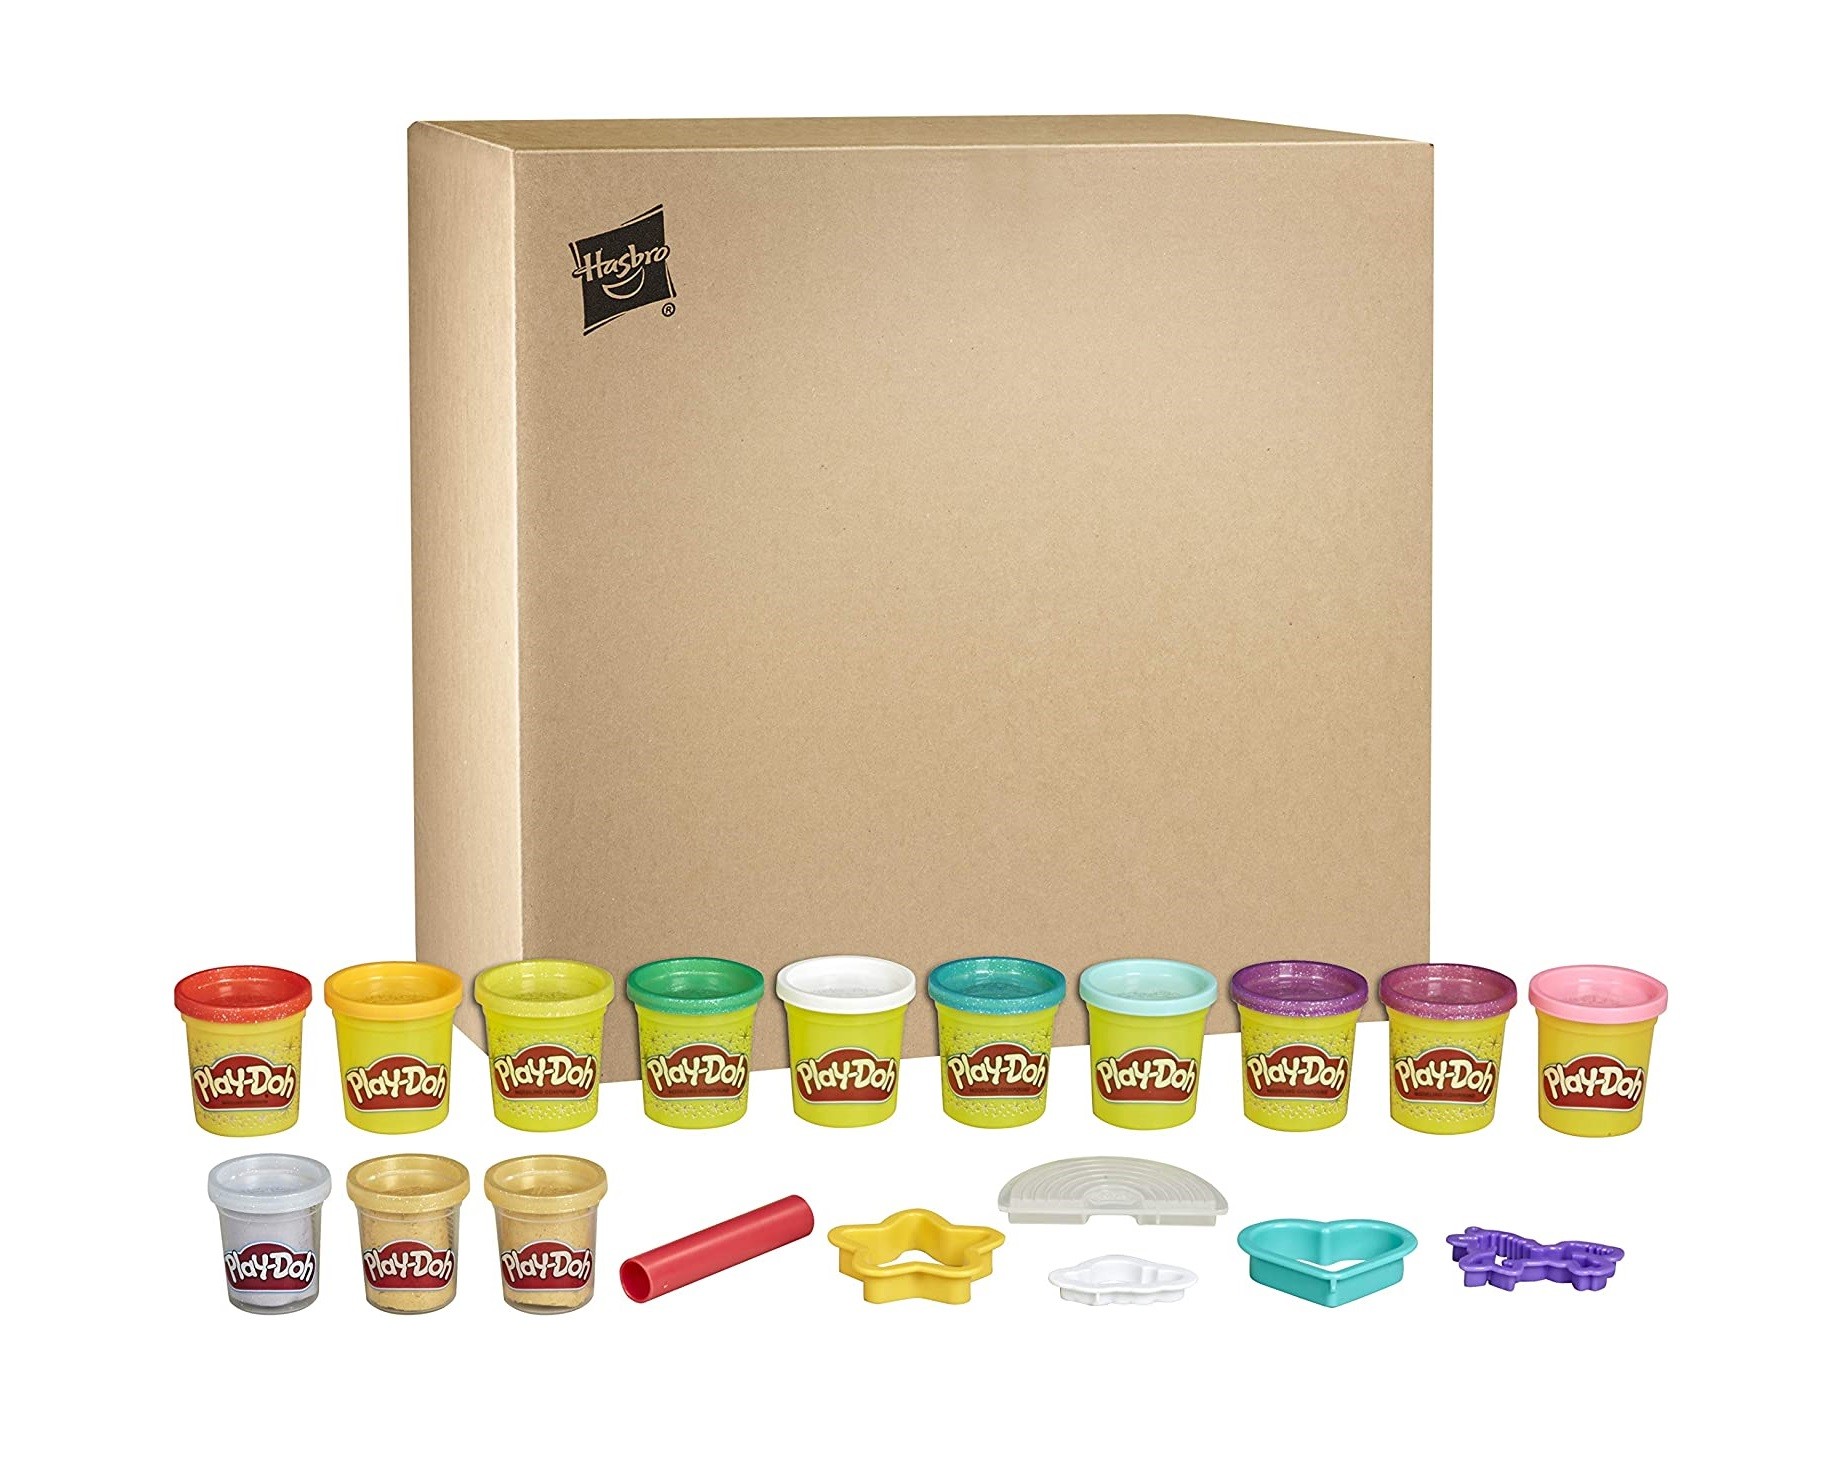 Hasbro Play-Doh Colors & Textures Variety Pack - 1 Each